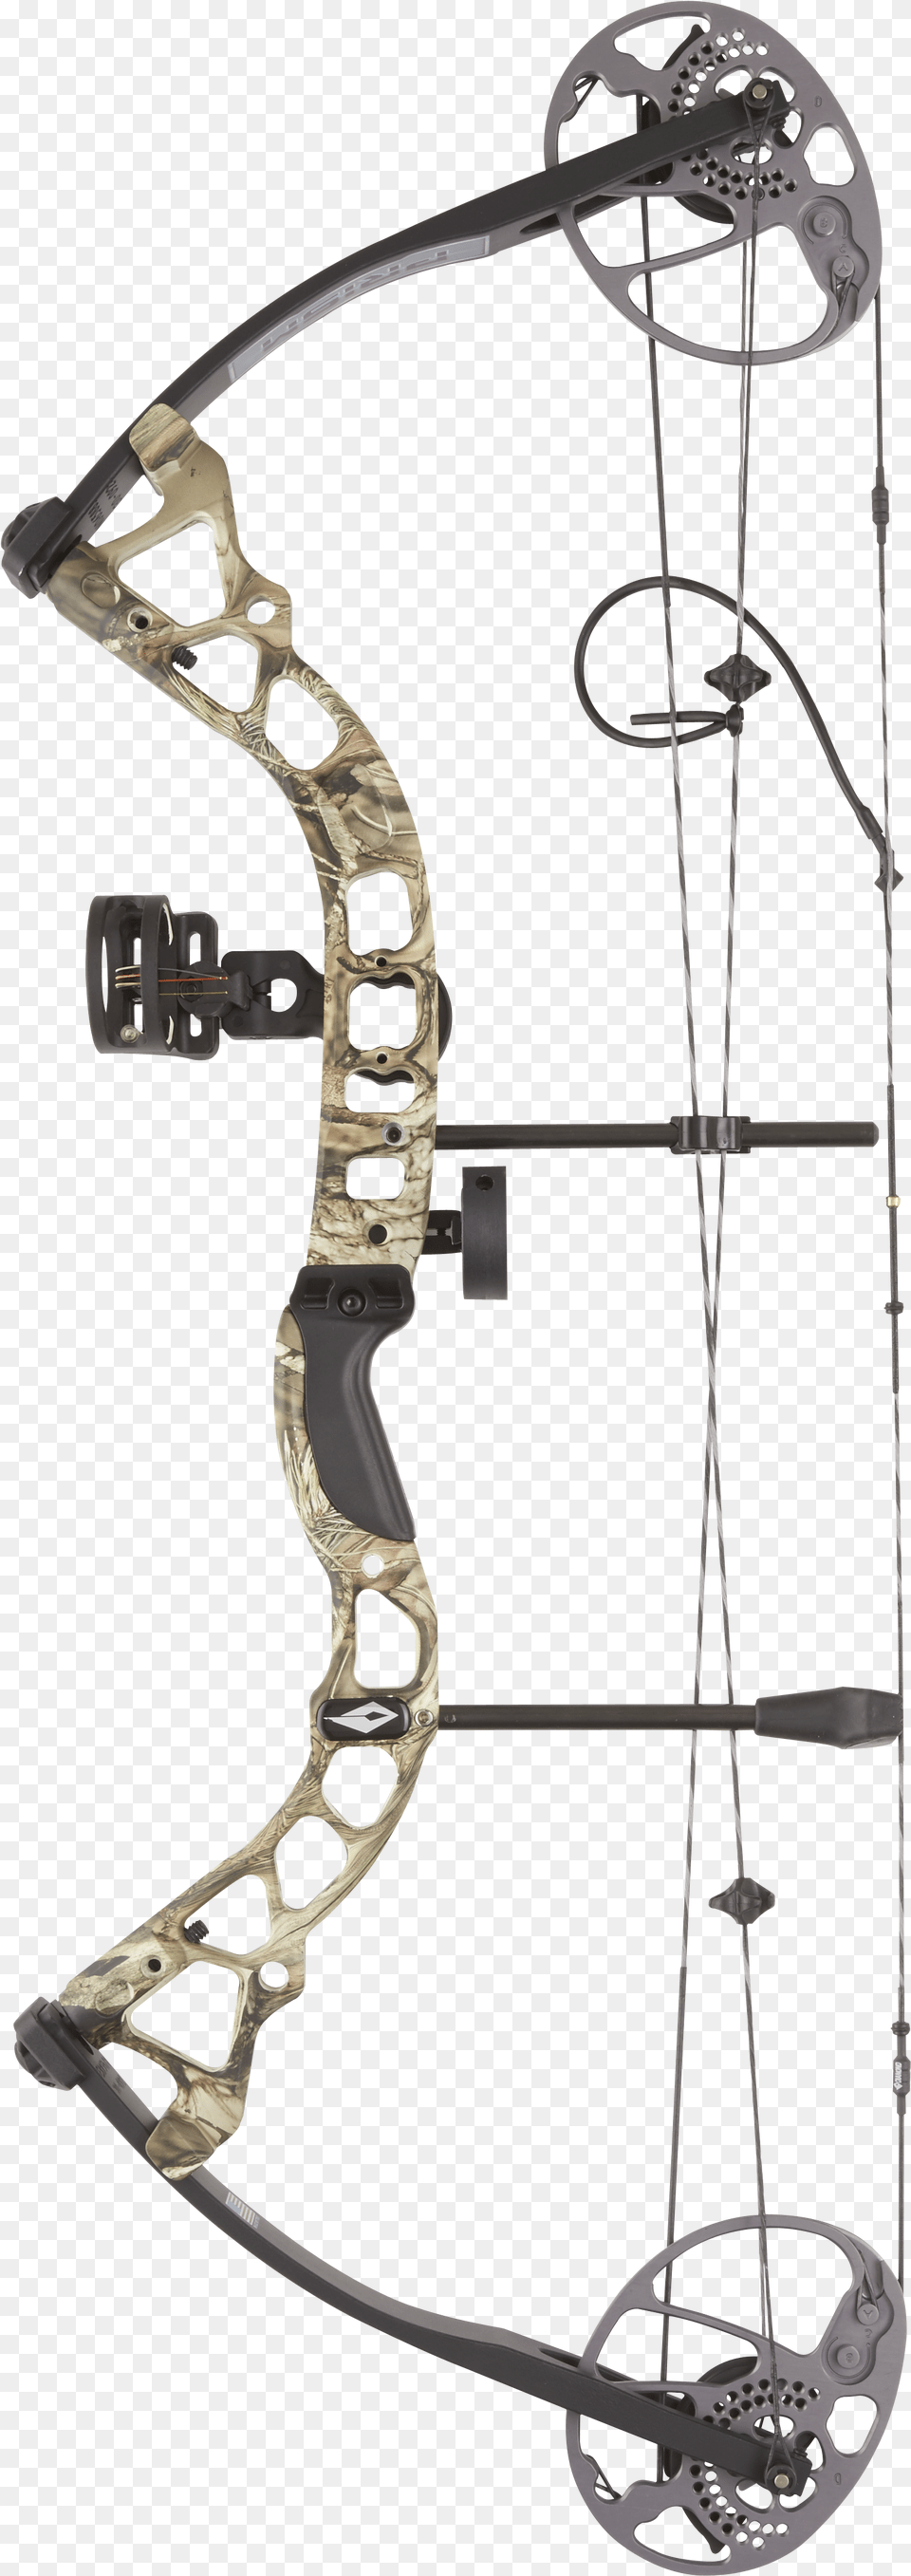 Prism Mo Country Diamond Prism Compound Bow Reviews, Weapon, Machine, Wheel Free Png Download